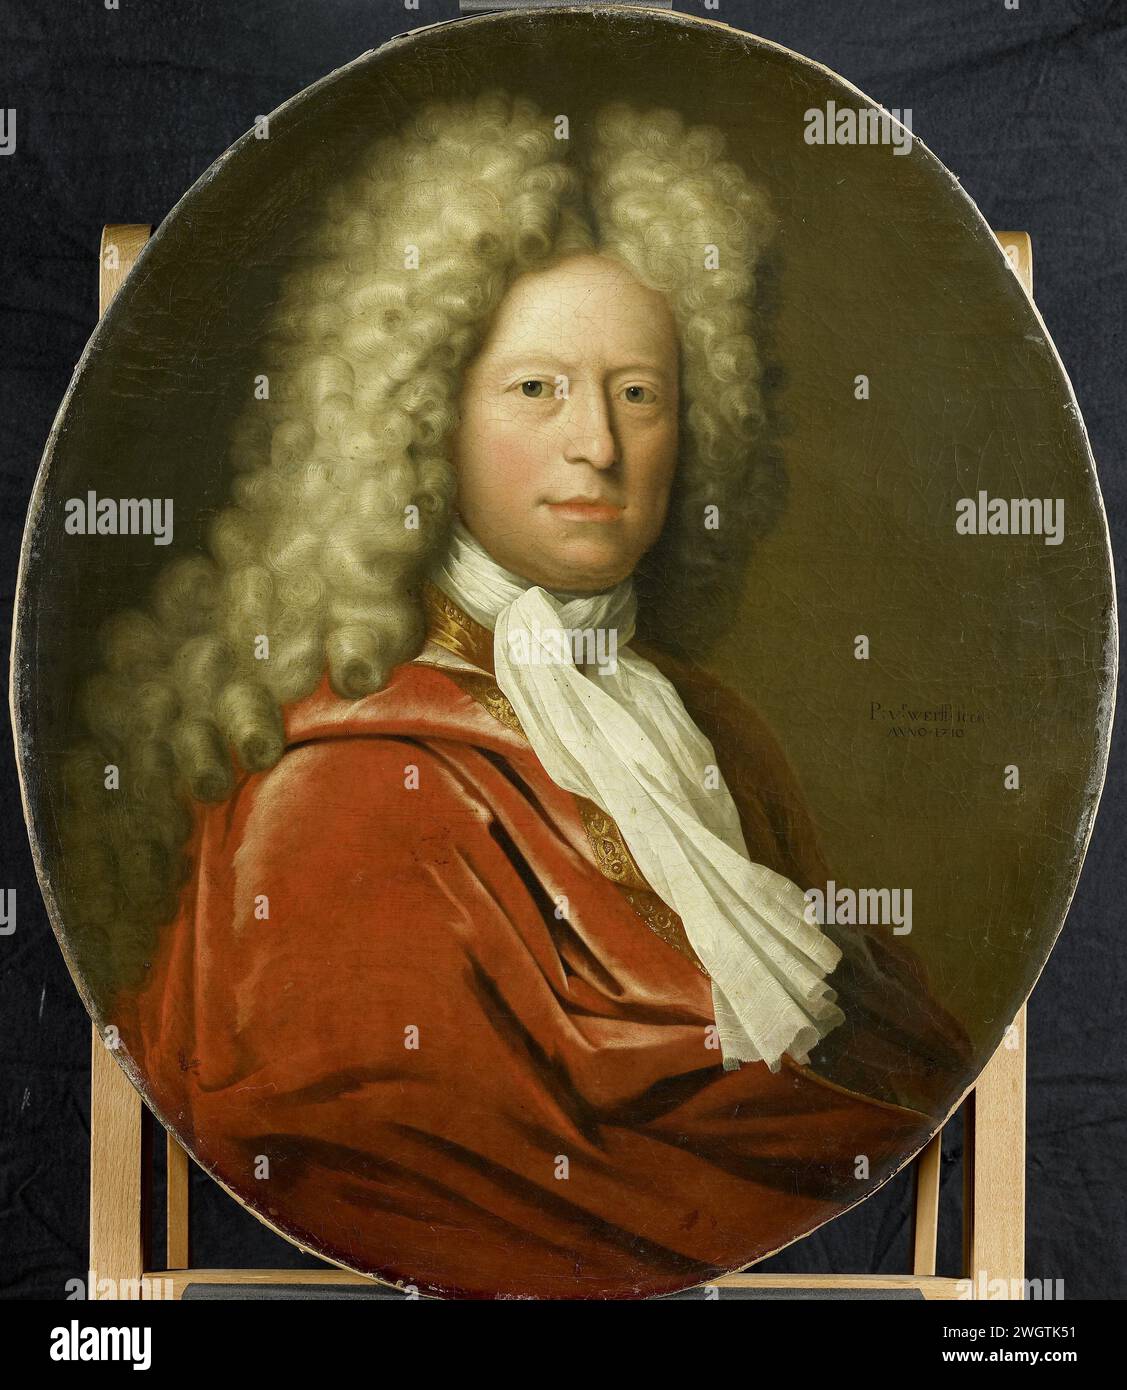 Portrait or Mr. Brust, Pieter van der Werff, 1710 painting Portrait of Mr Brust, bust in oval to the right. Pendant of SK-A-2658.  canvas. oil paint (paint)  historical persons Stock Photo